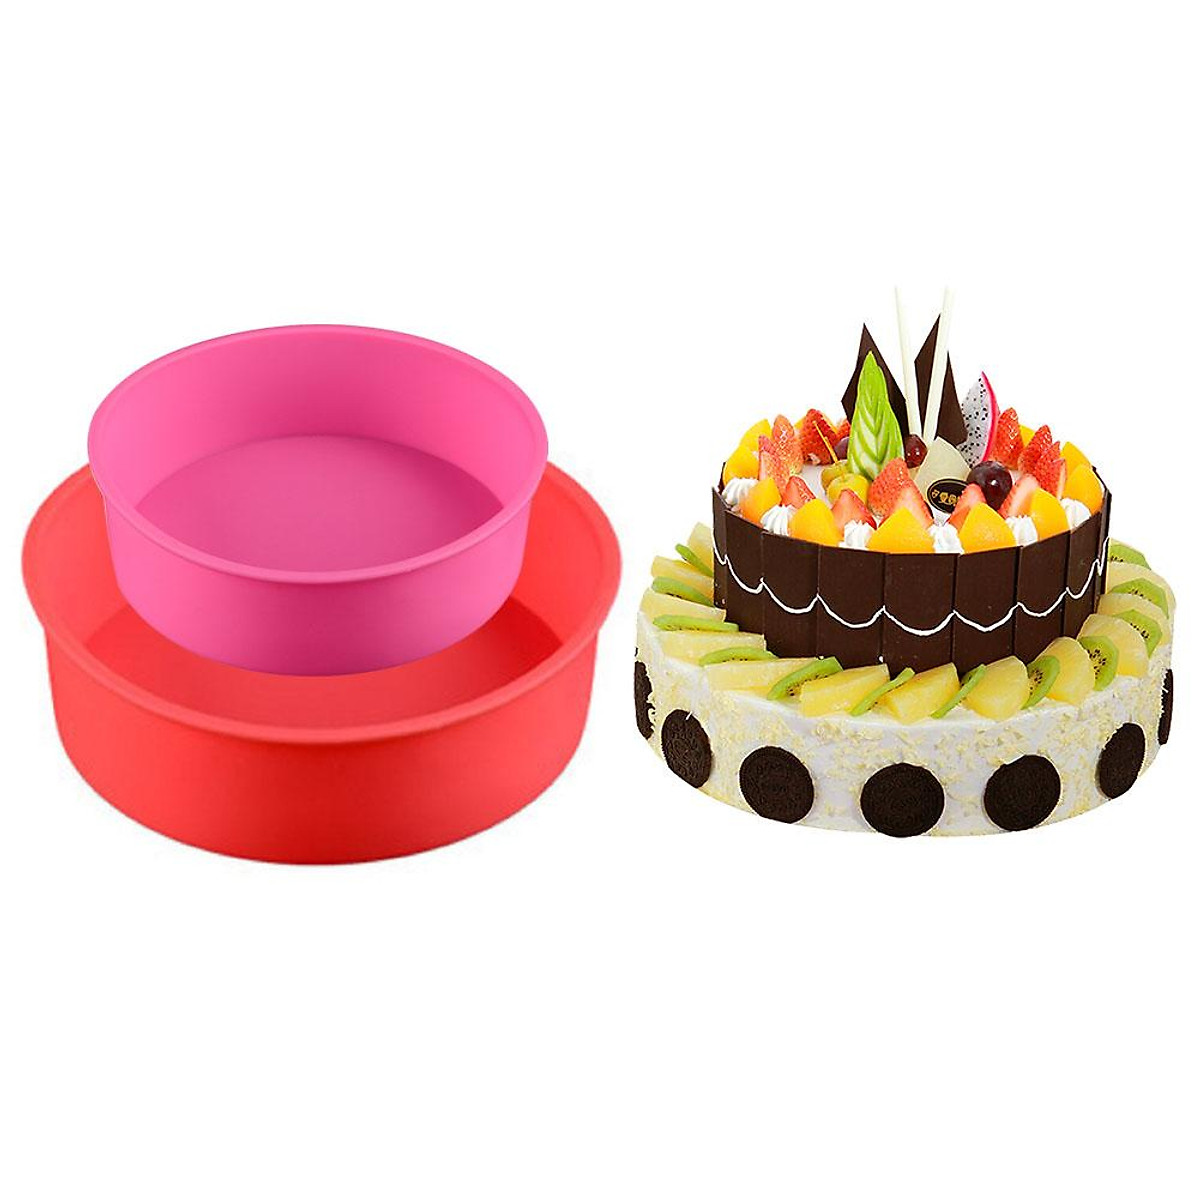 1pc 8 Inch Cake Mold, Simple Red Spiral Design Silicone Cake Pan For Baking,  Kitchen | SHEIN